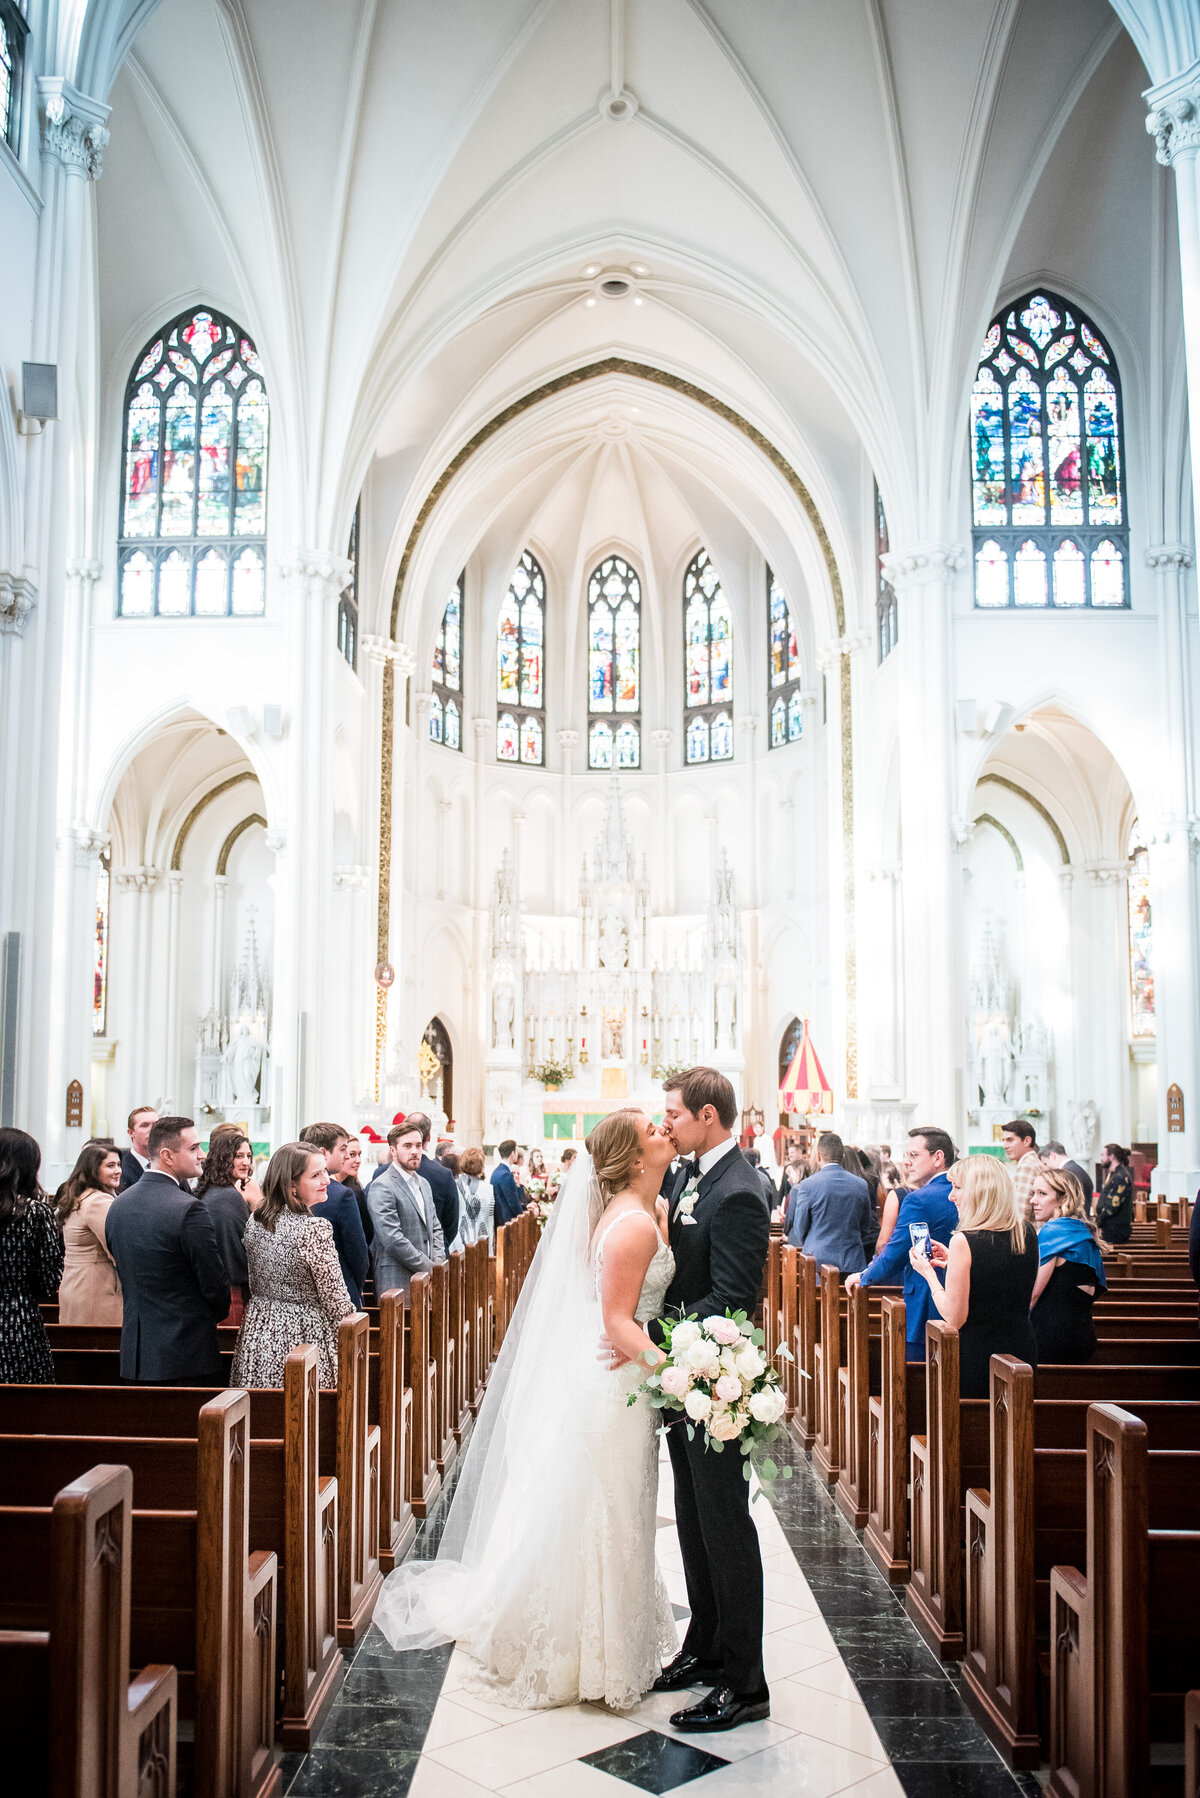 A bride and groom share a kiss at the end of the aisle after their church ceremony in Denver, Colorado.